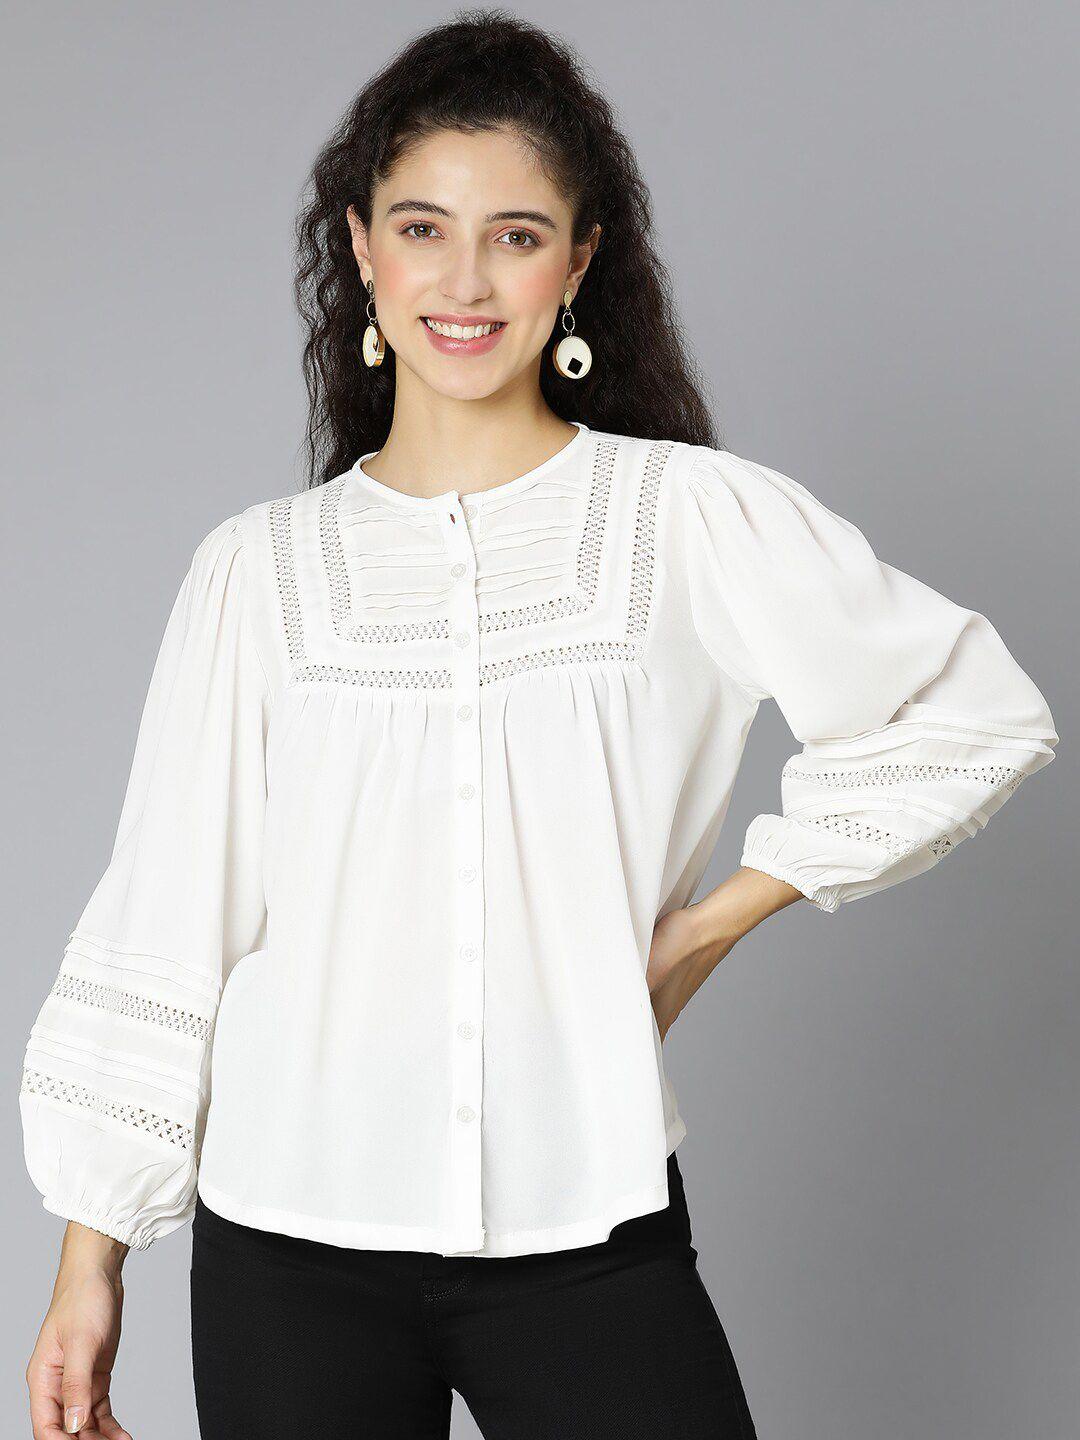 oxolloxo white self designed embroidered cuffed sleeves blouson top